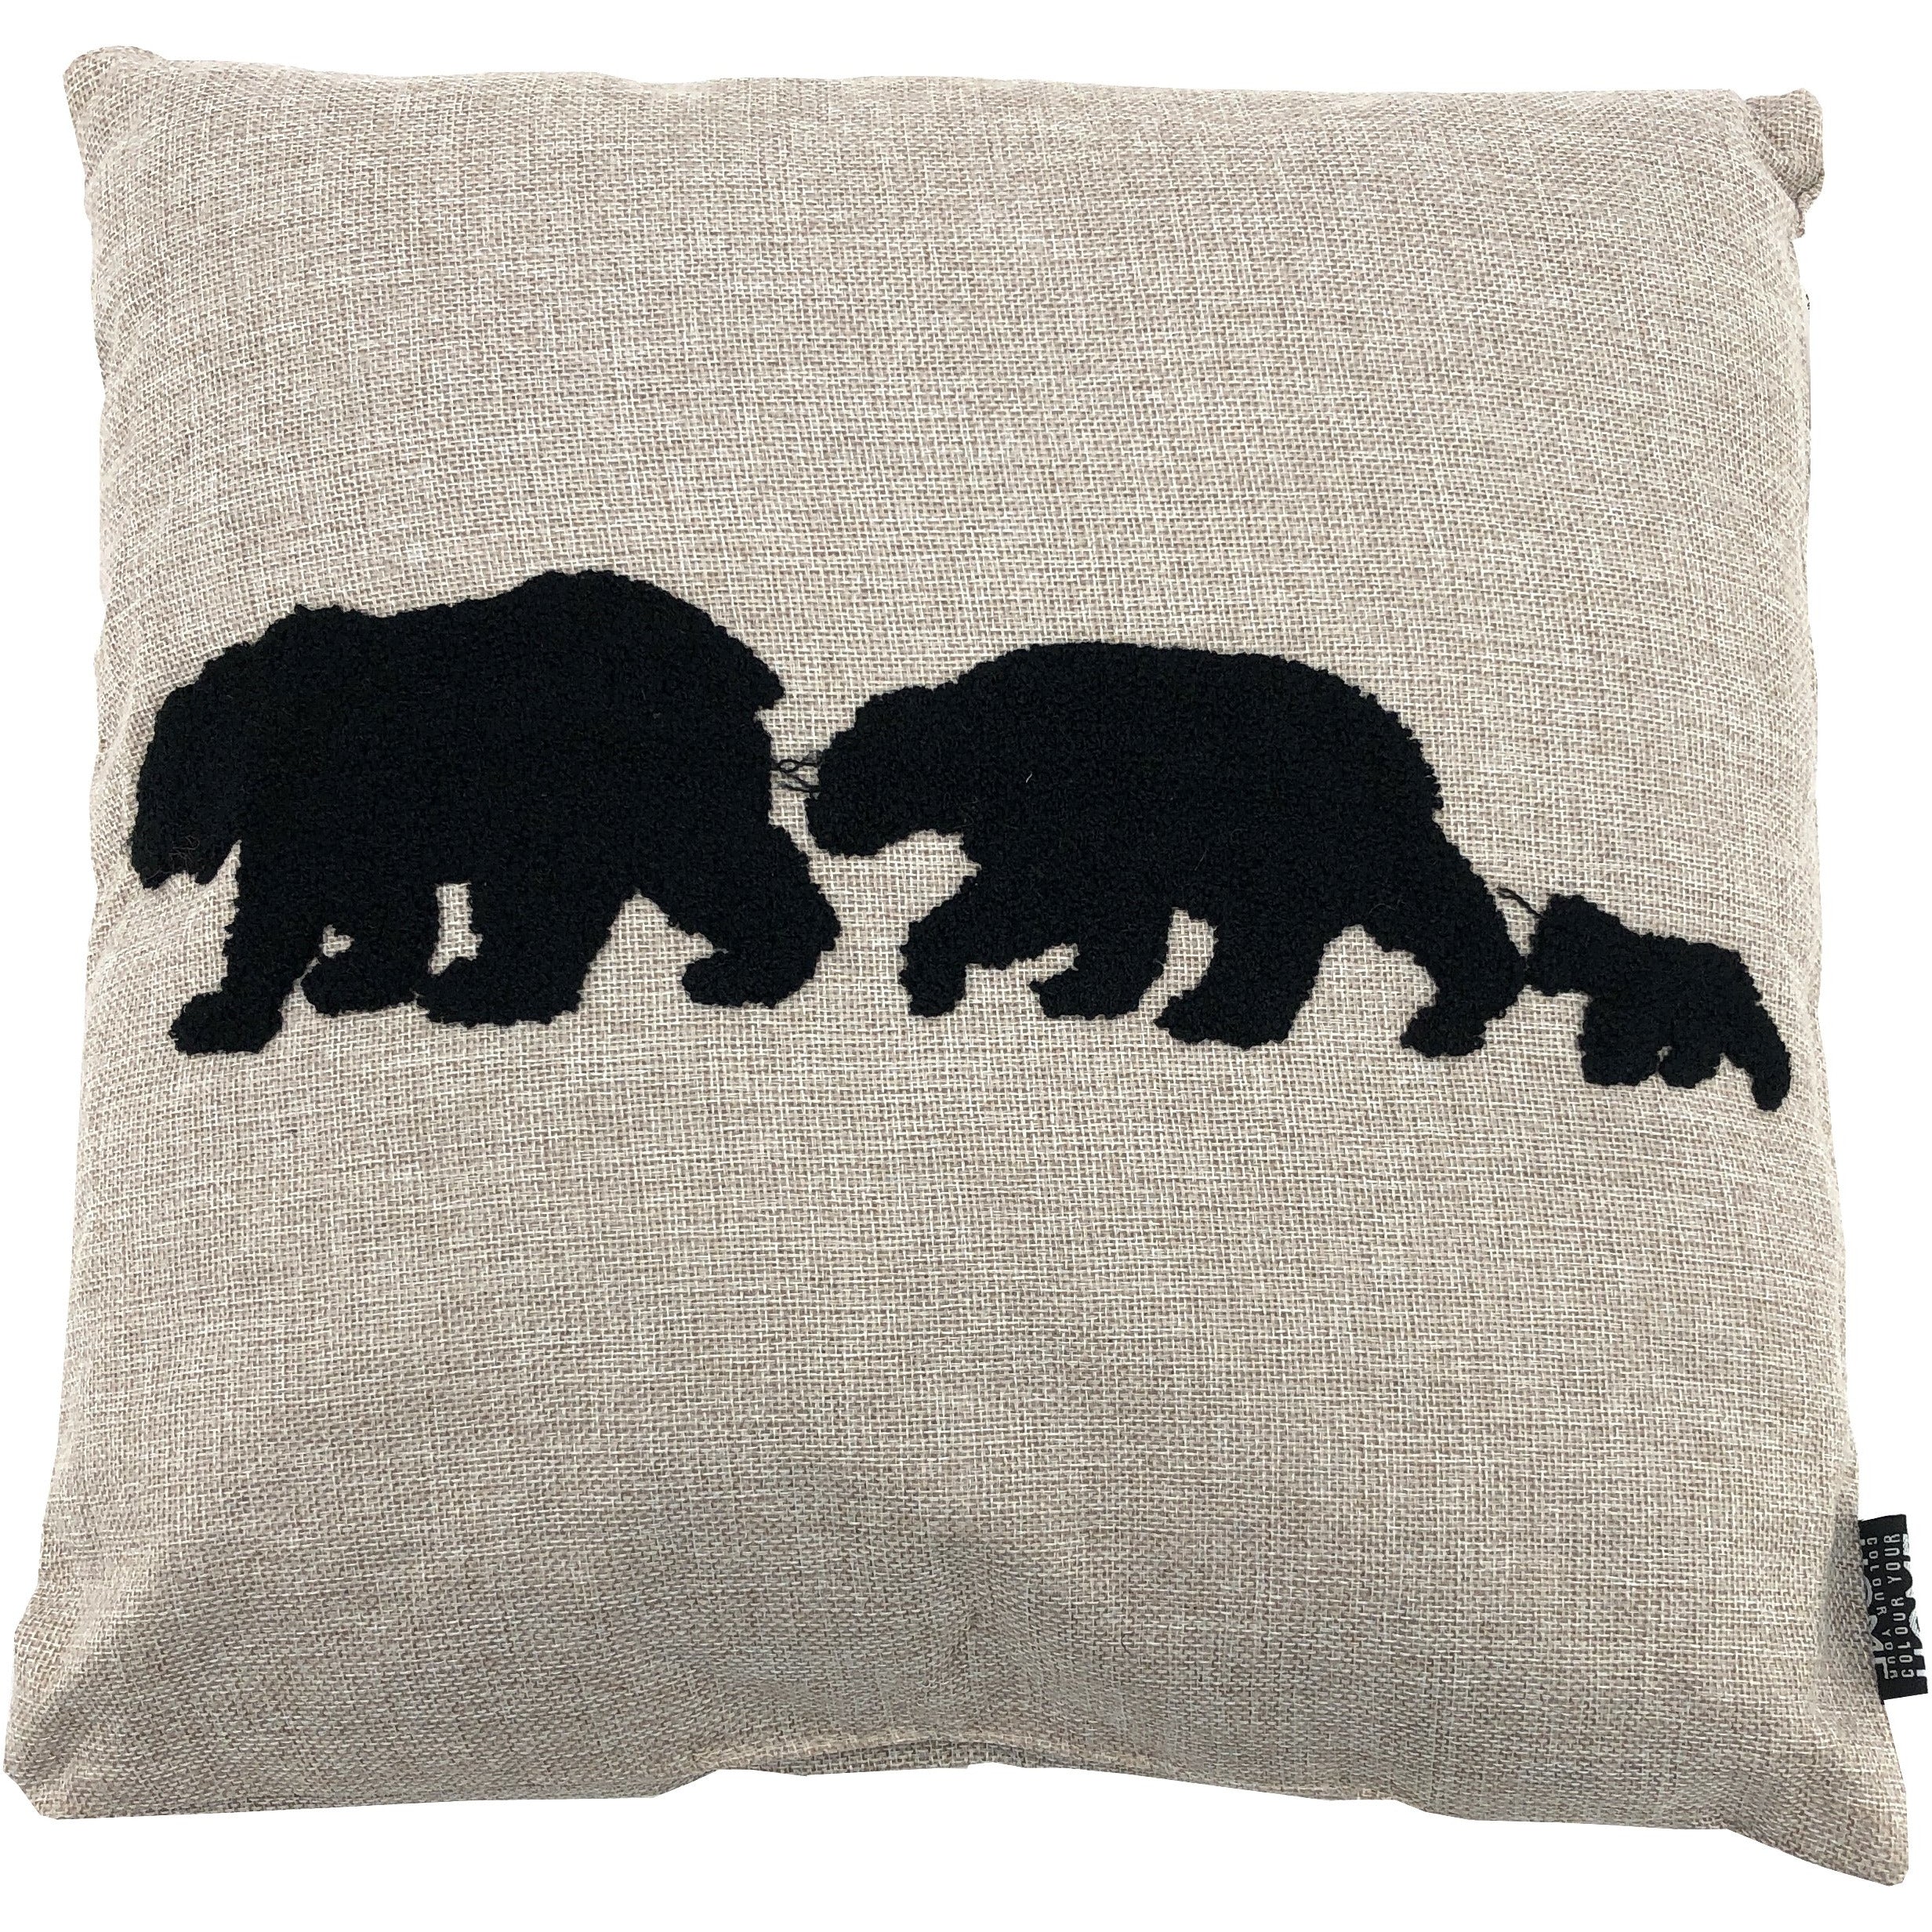 Decorative Throw Pillows / Animal Print / Couch Pillow / Rustic Theme / 17”x17” / Various Colours and Designs